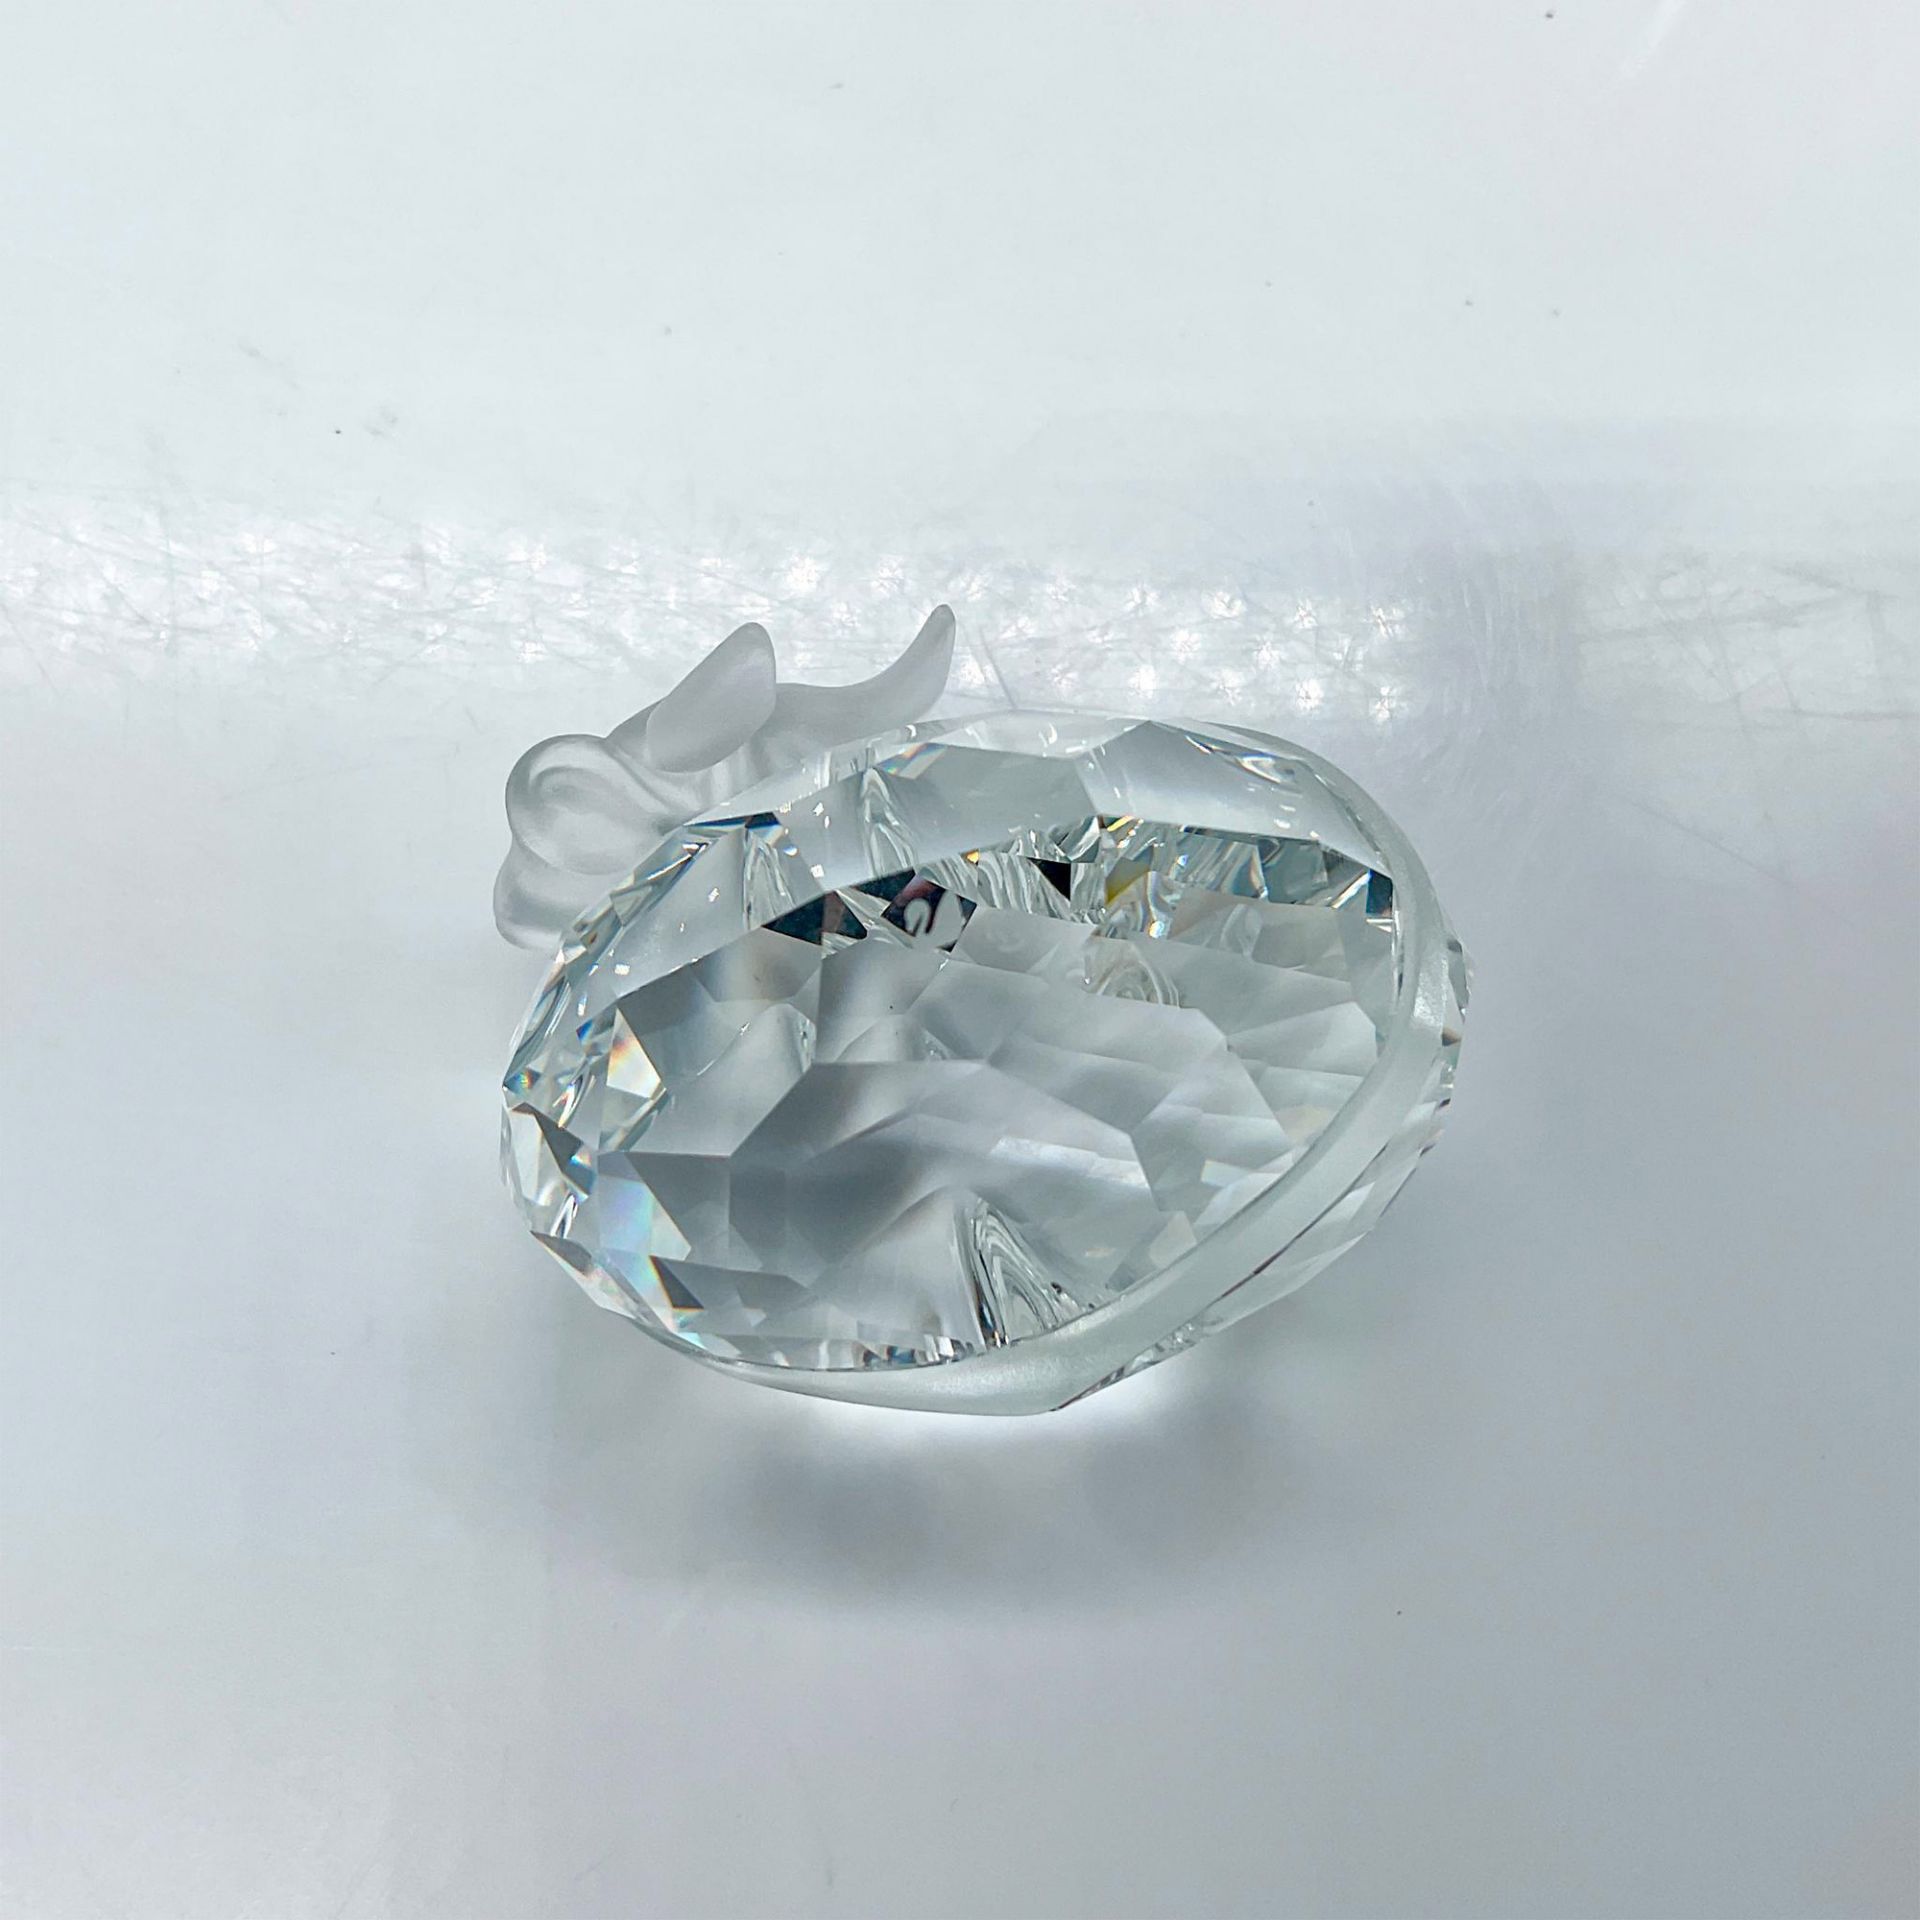 Swarovski Silver Crystal Paperweight, Sweetheart - Image 3 of 3